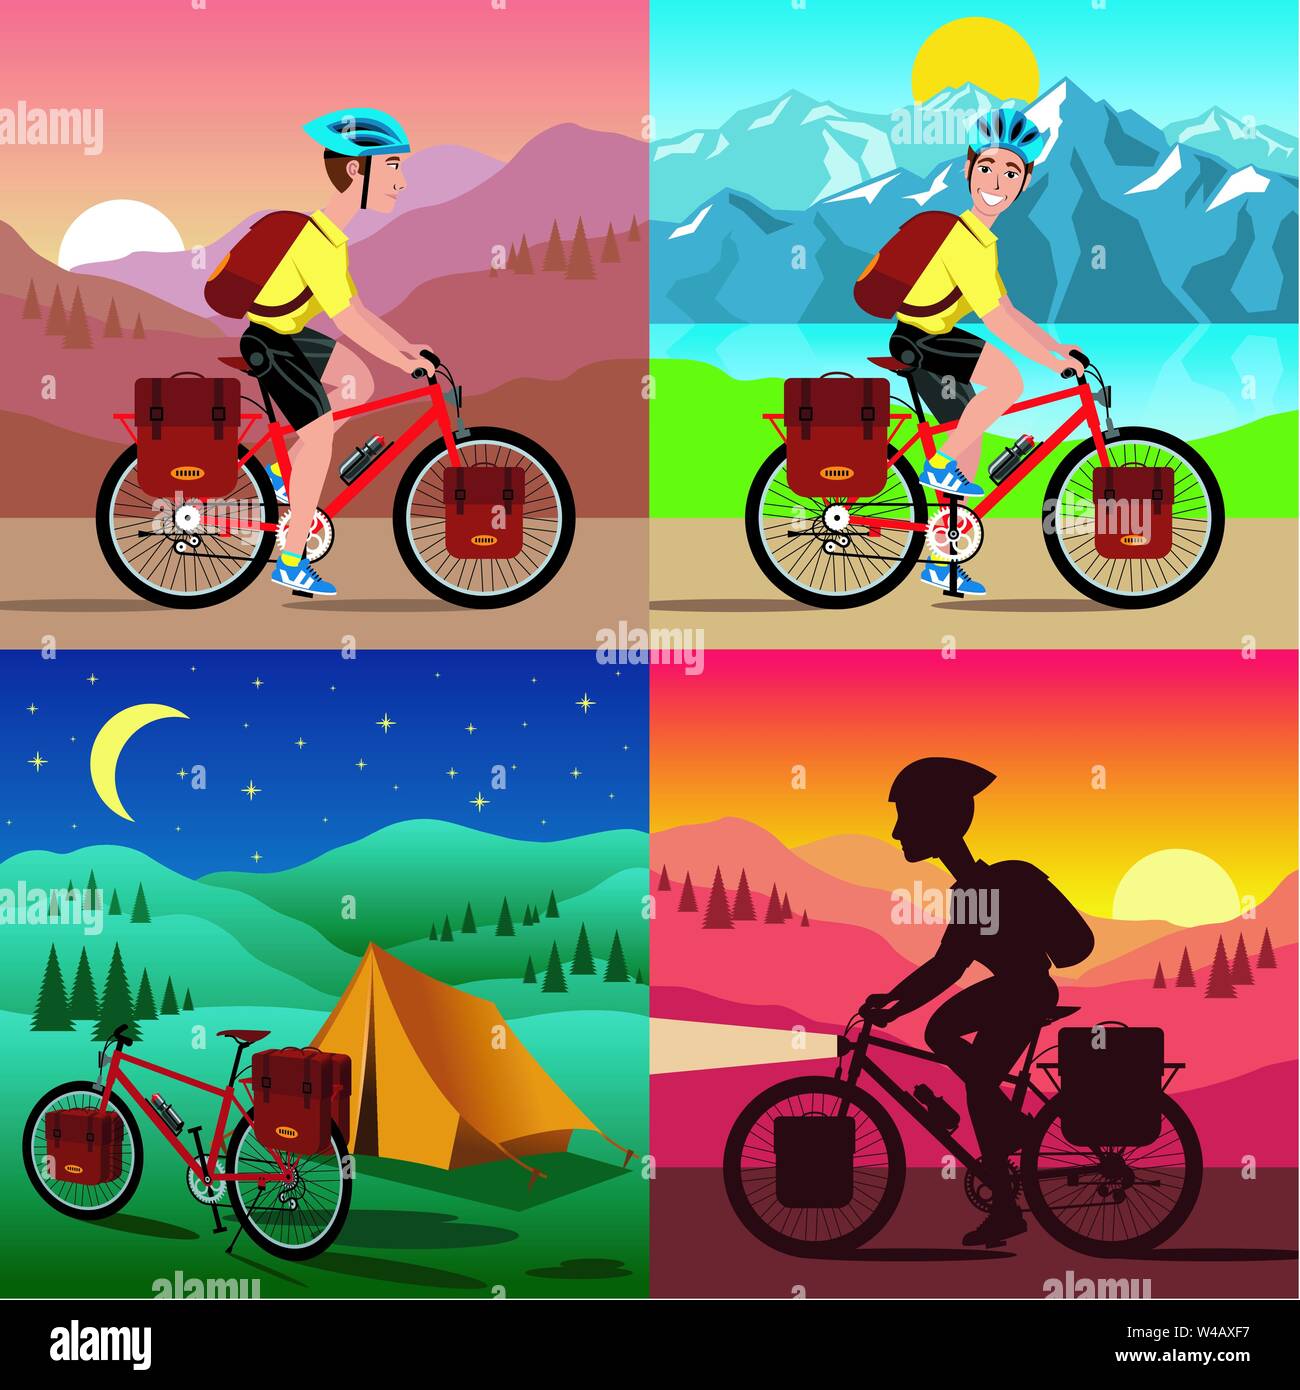 A vector illustration of a man mountain biking in different parts of the day. Stock Vector